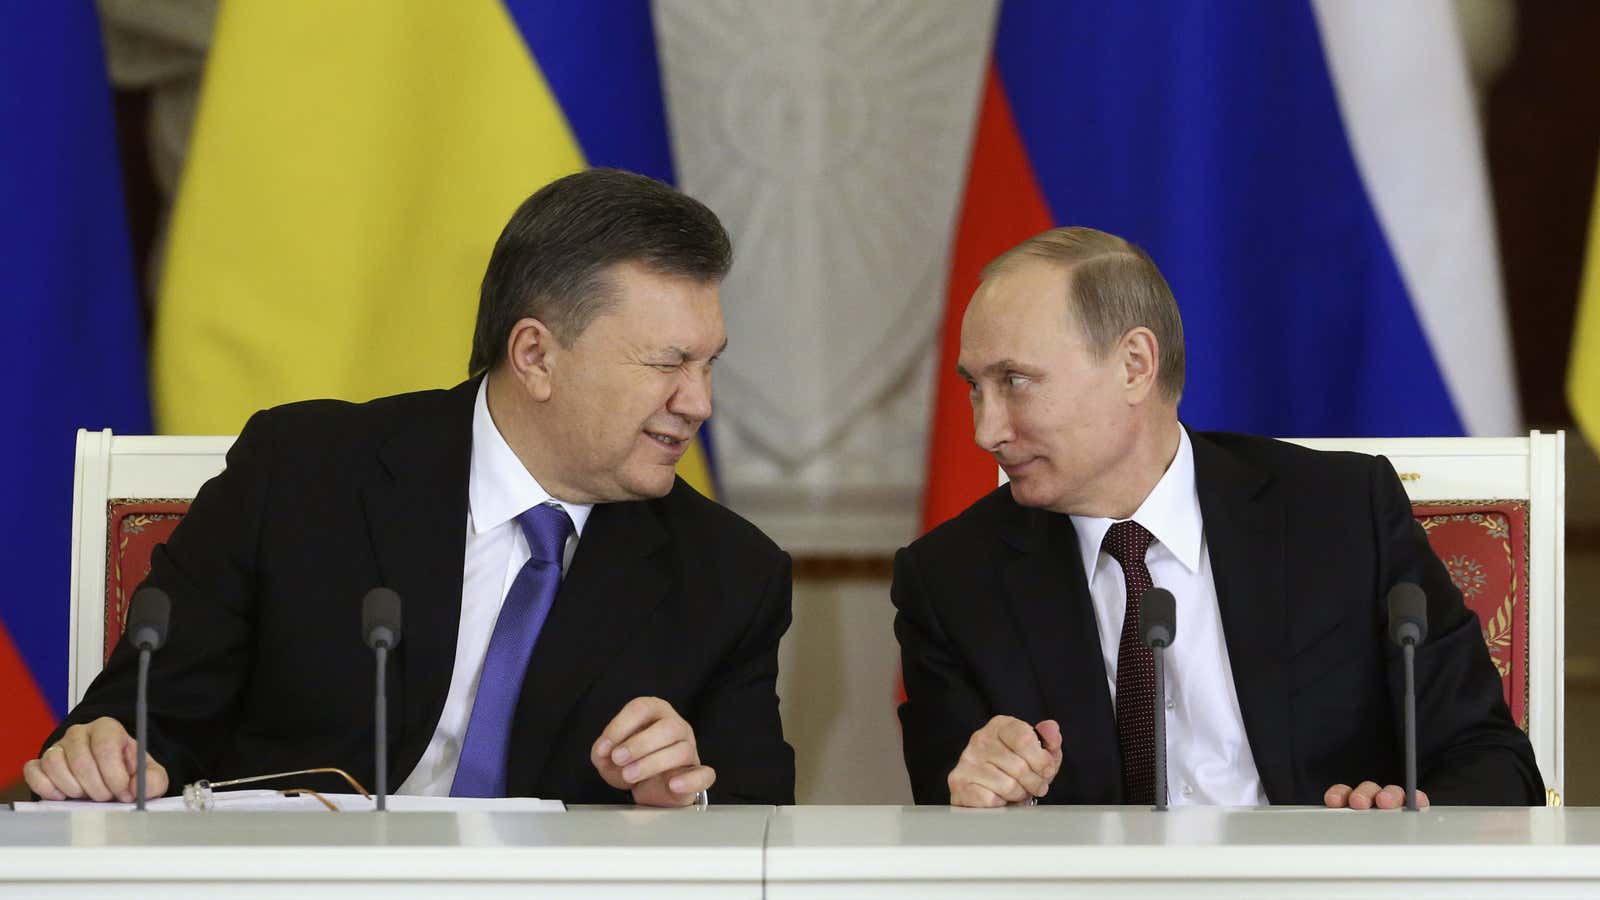 Ukrainian President Viktor Yanukovich (L) gives a wink to his Russian counterpart Vladimir Putin during a signing ceremony after a meeting of the Russian-Ukrainian Interstate…